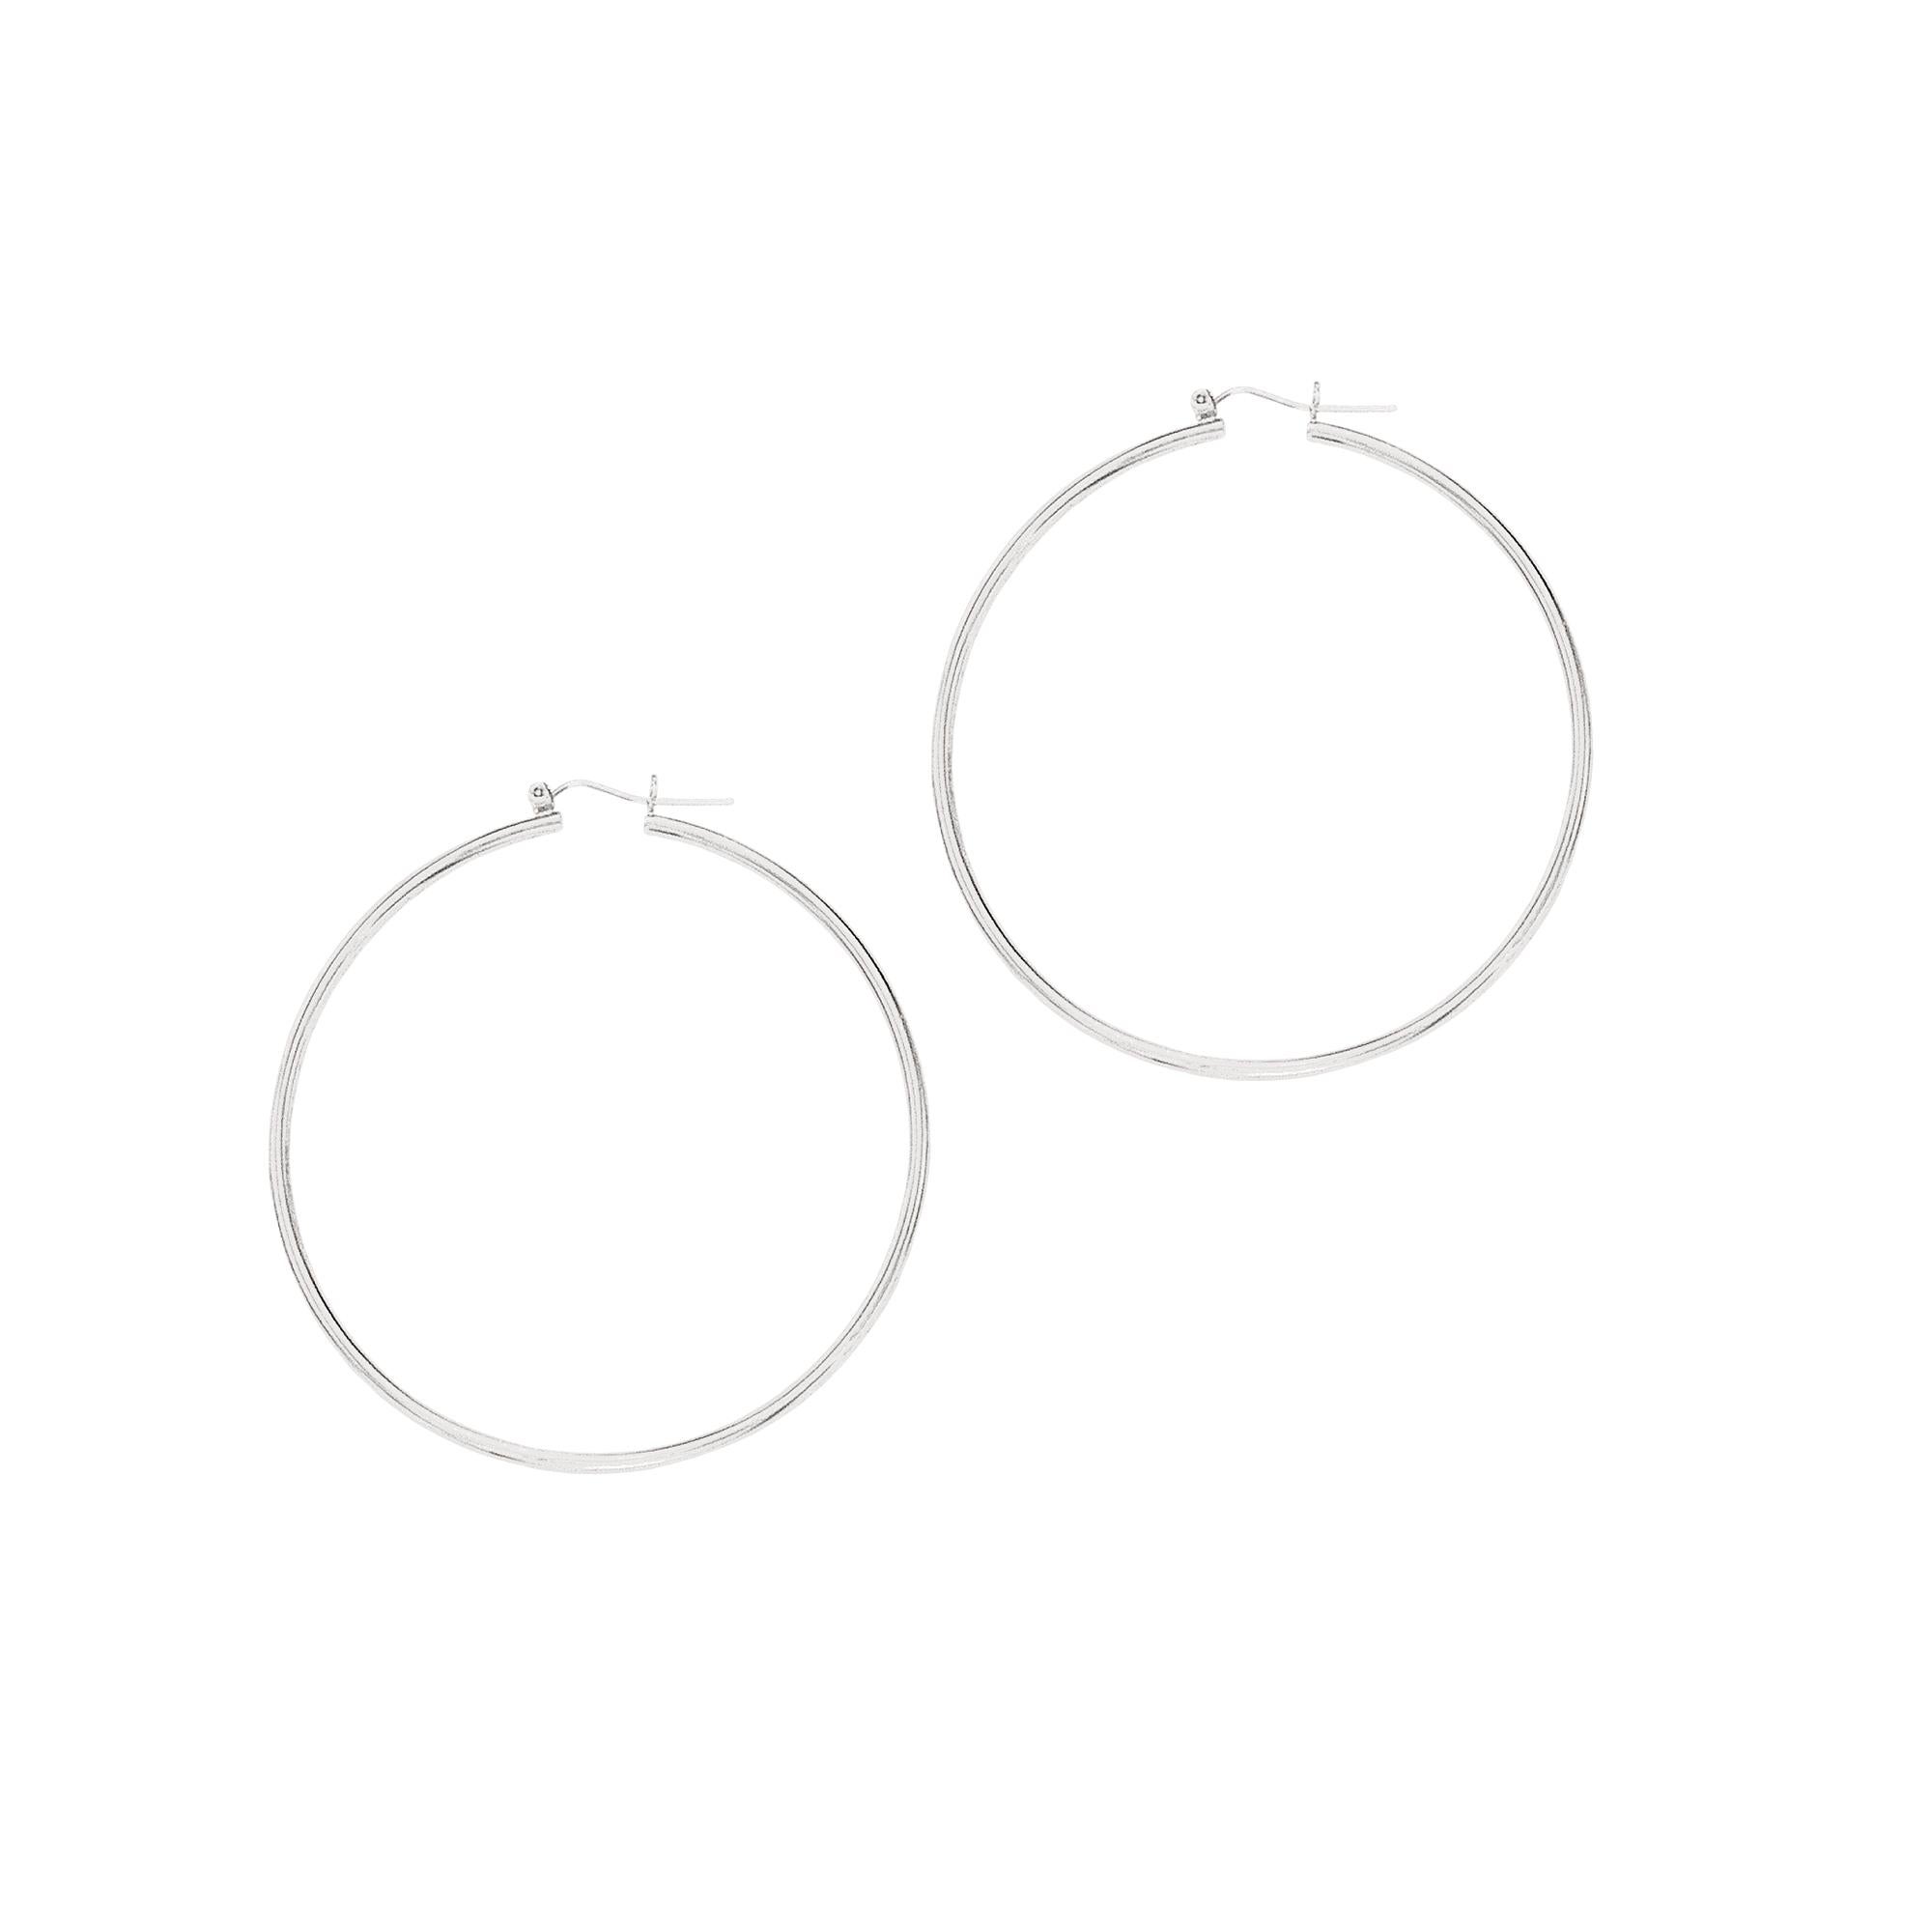 Fourteen karats yellow gold large circle hoop earrings
Diameter 2.25 inch 
Width 2 millimeter equals 0.08 inch
Also available in 14 karats white and rose gold, prices may vary
Please contact us for choice of metal
New Earrings
The latest and